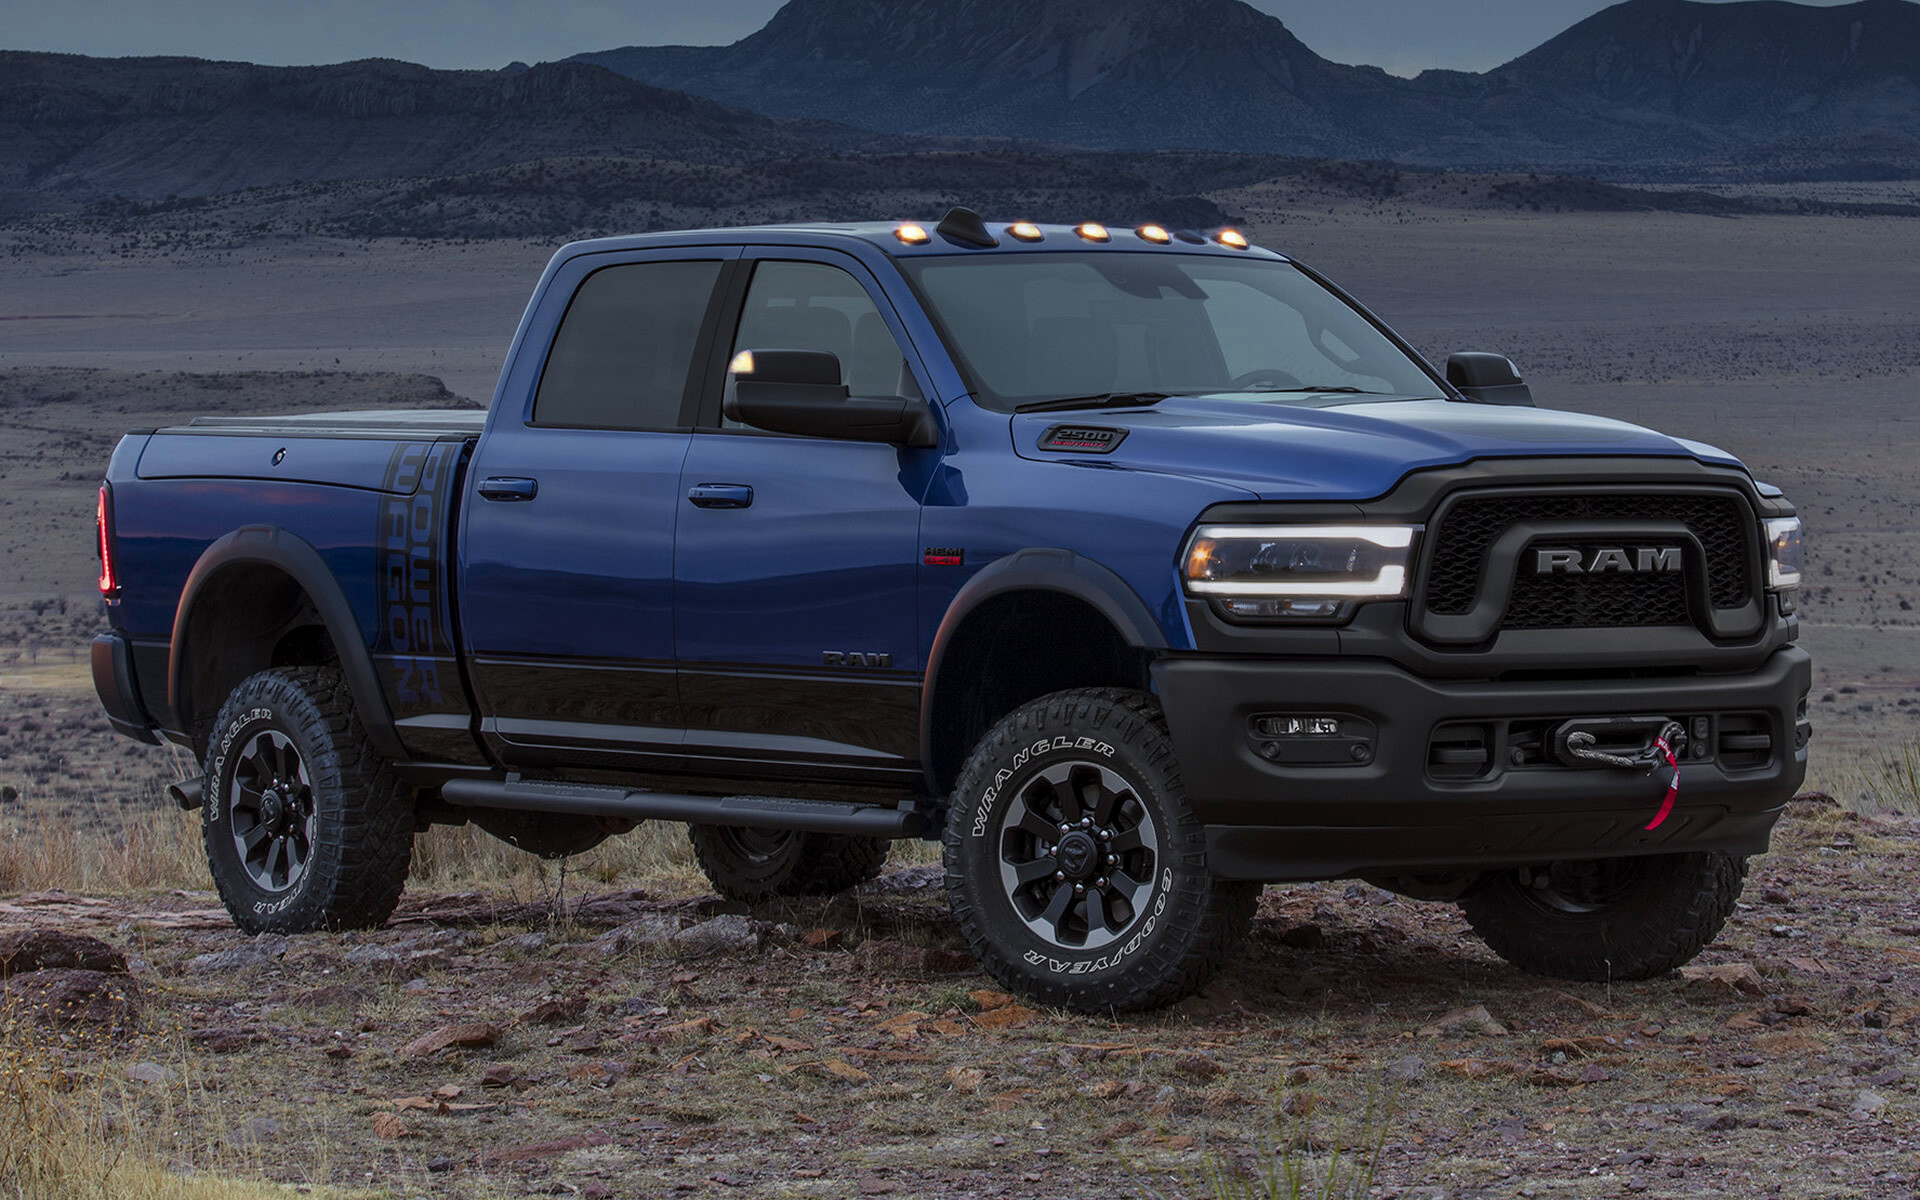 Ram Pickup: Power Wagon model was introduced for 2005, A light-duty truck. 1920x1200 HD Background.